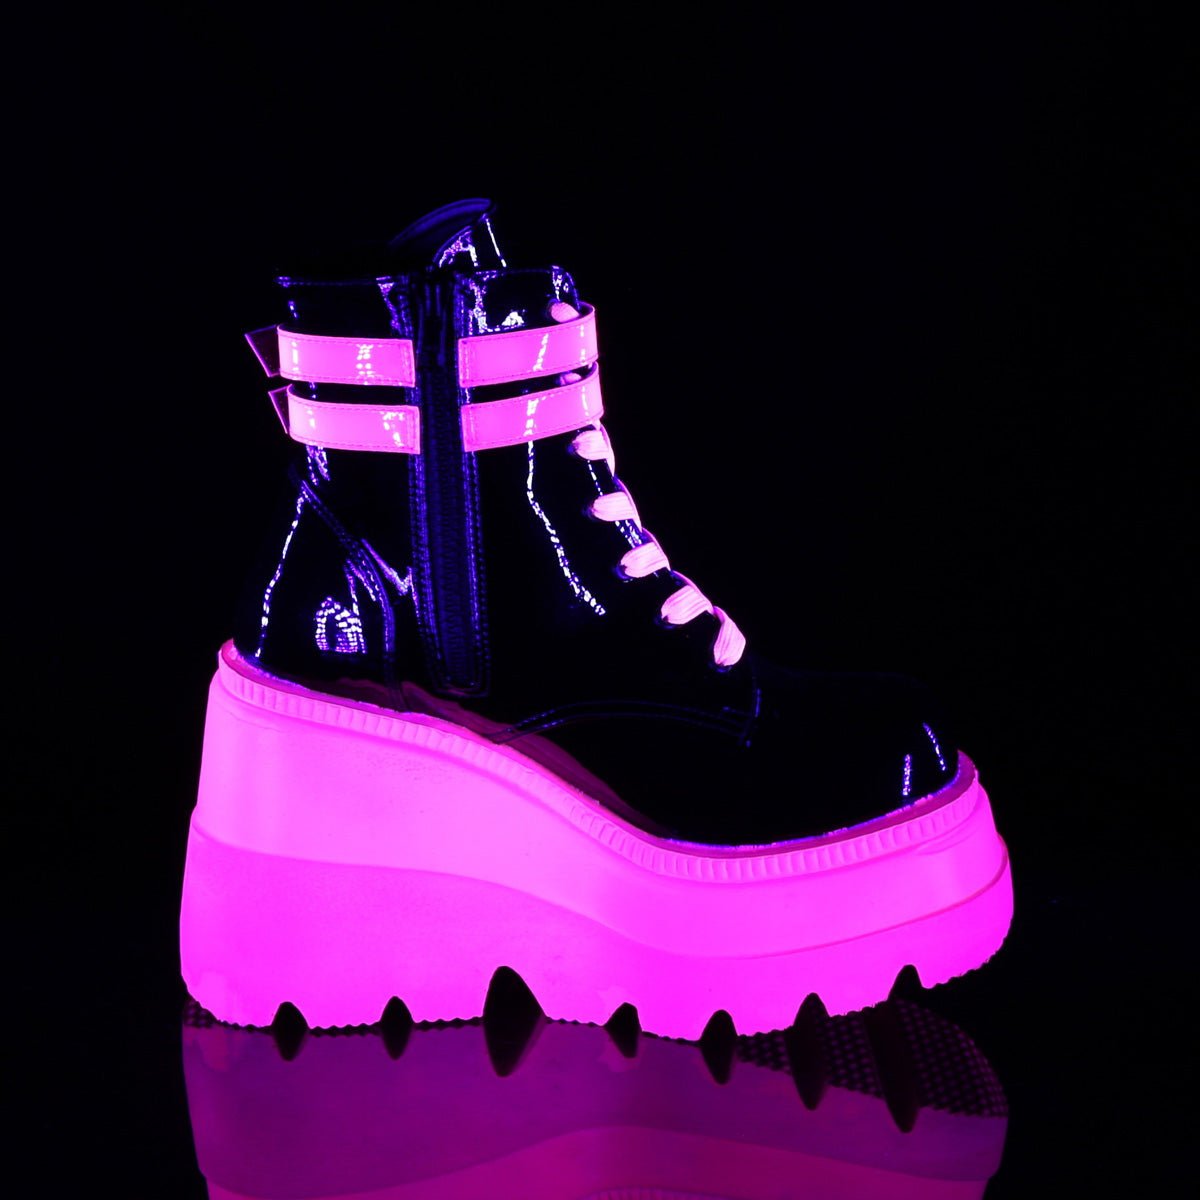 Too Fast | Demonia Shaker 52 | Black &amp; Neon Pink Patent Leather &amp; Uv Neon Women&#39;s Ankle Boots